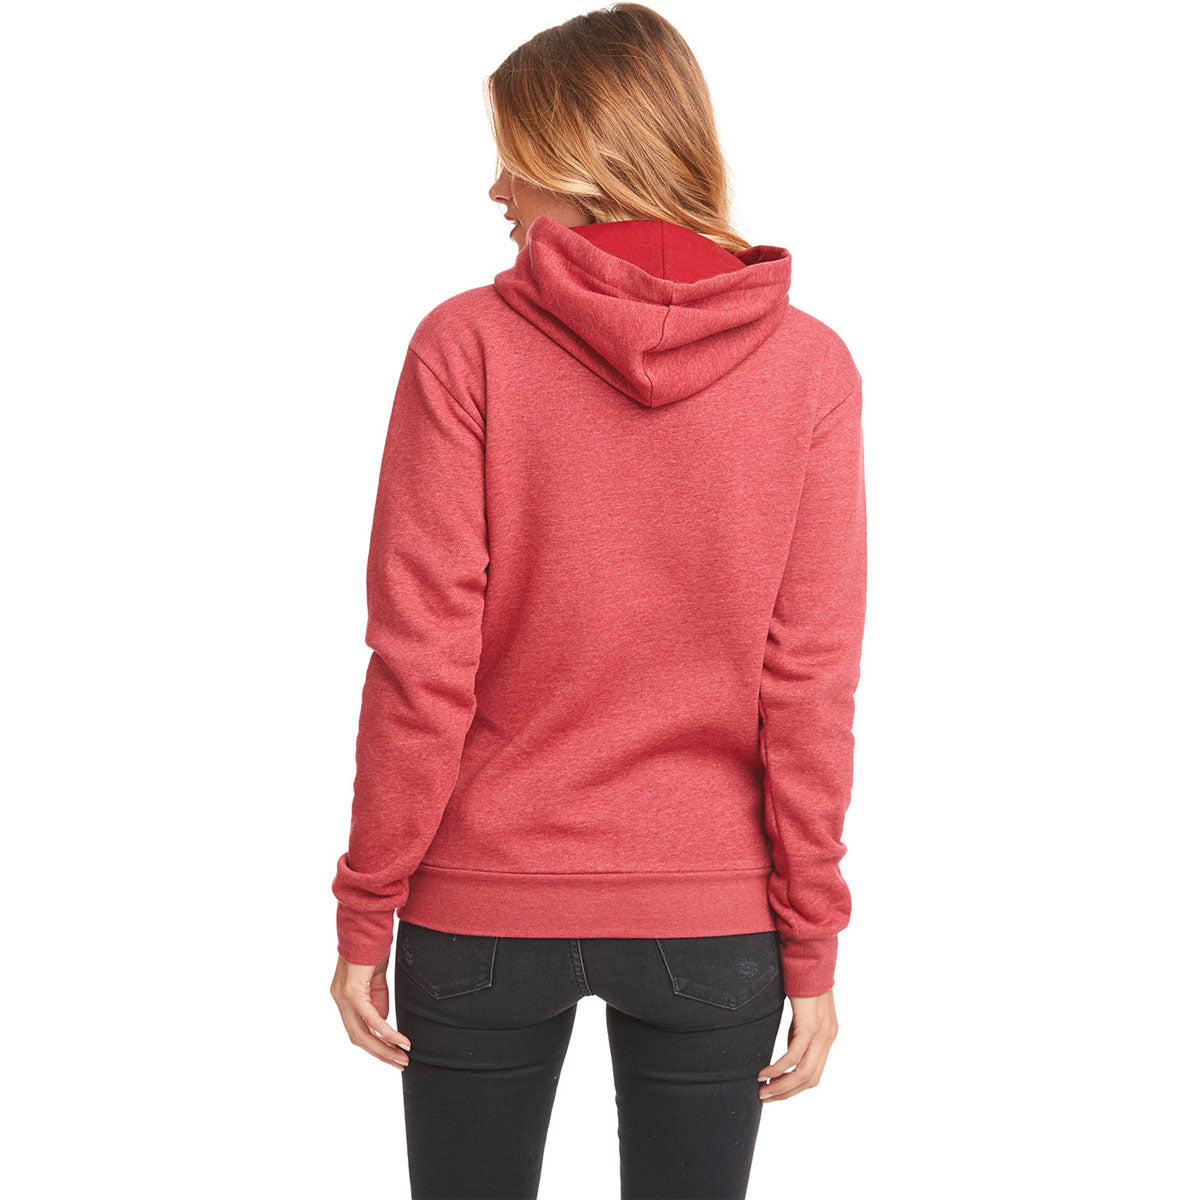 Next Level Unisex Heather Cardinal Classic PCH Pullover Hooded Sweatshirt